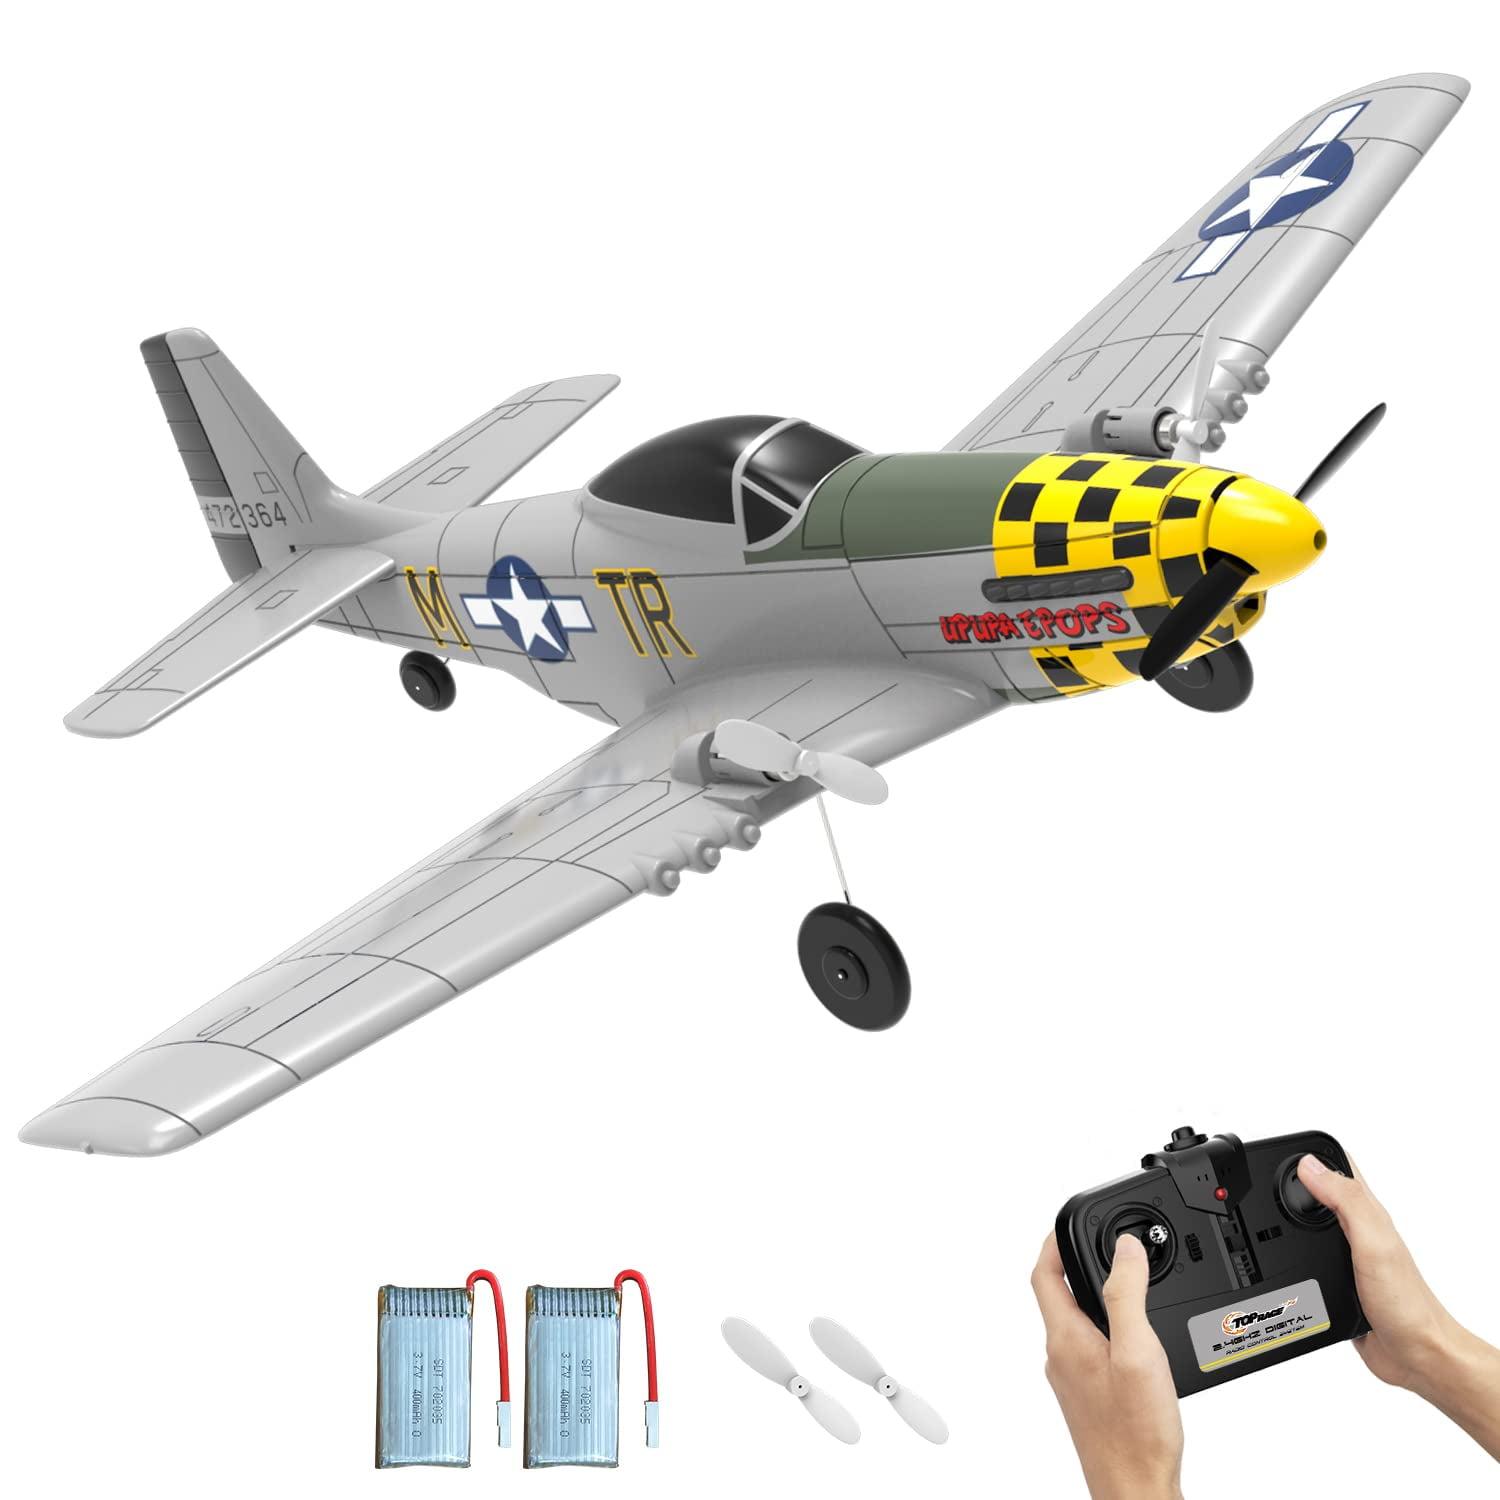 1/5 Scale Rc Airplane: Safety Precautions for Flying 1/5 Scale RC Airplanes